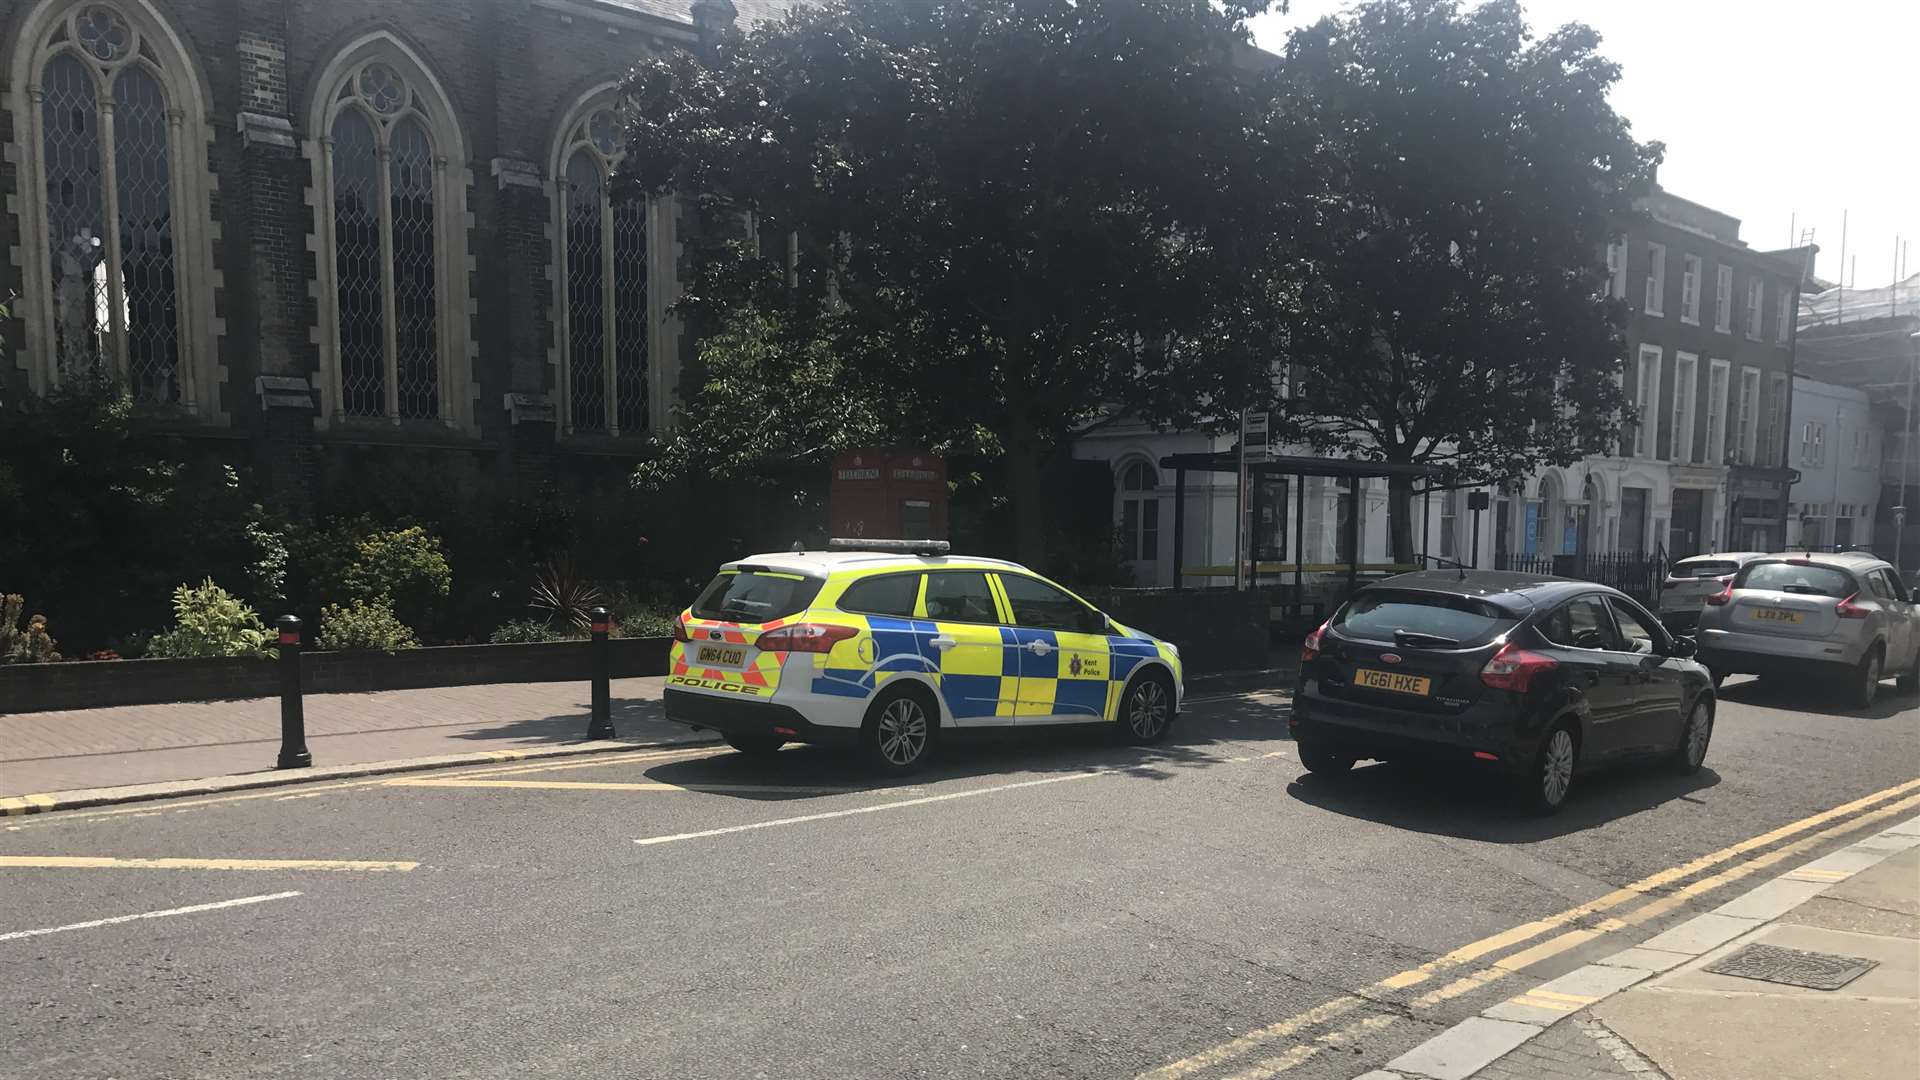 Police in Gravesend following reports of men with machetes - which turned out to be for work purposes